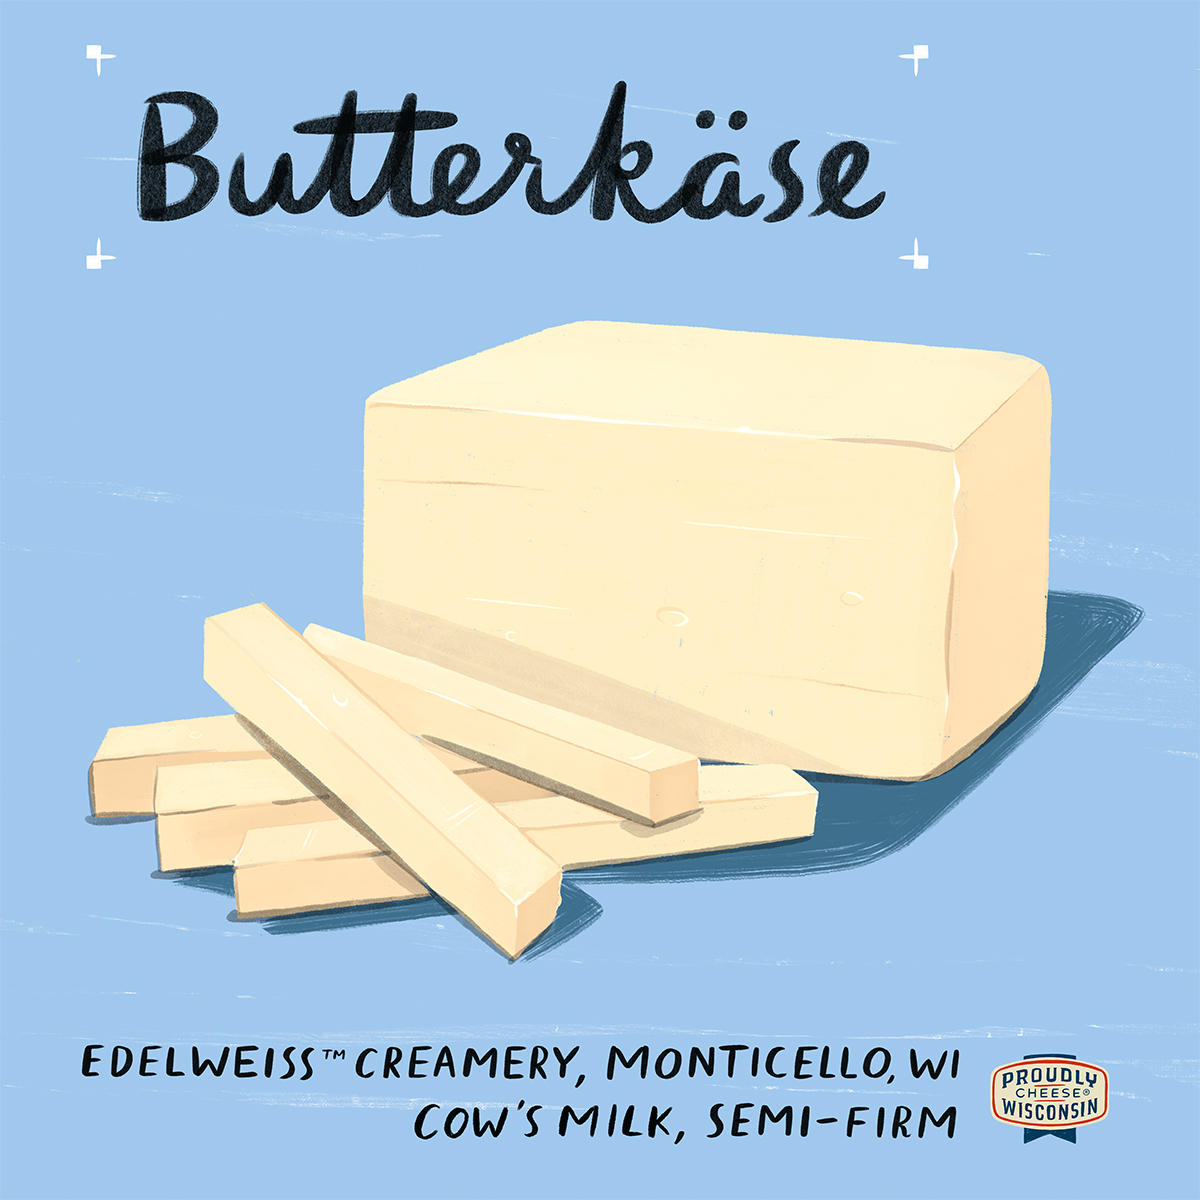 Cheese Lover’s Guide to Butterkäse 